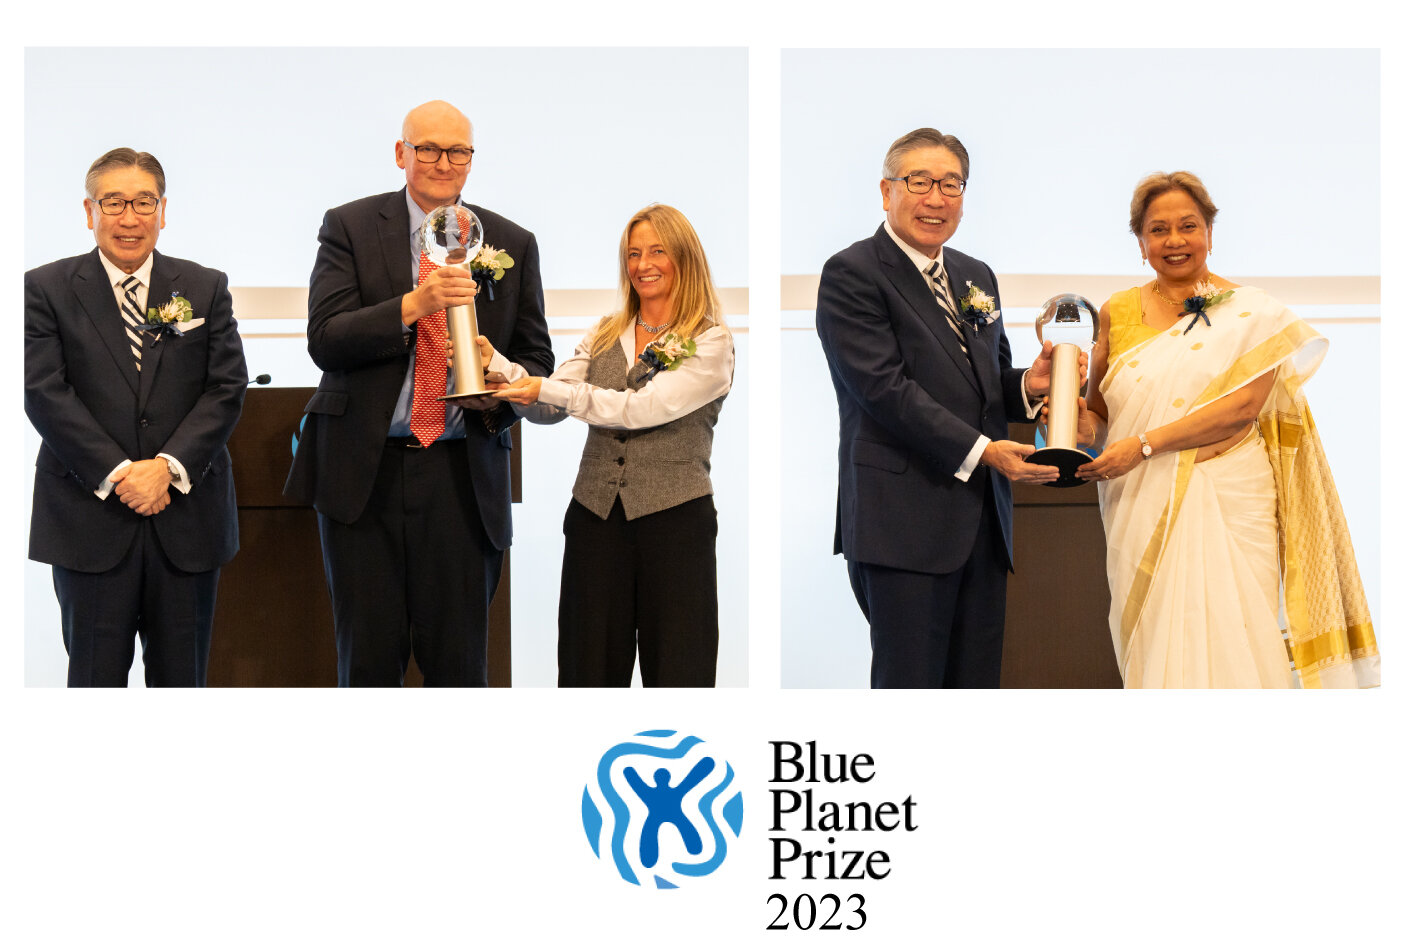 2023 Blue Planet Prize award ceremony was held